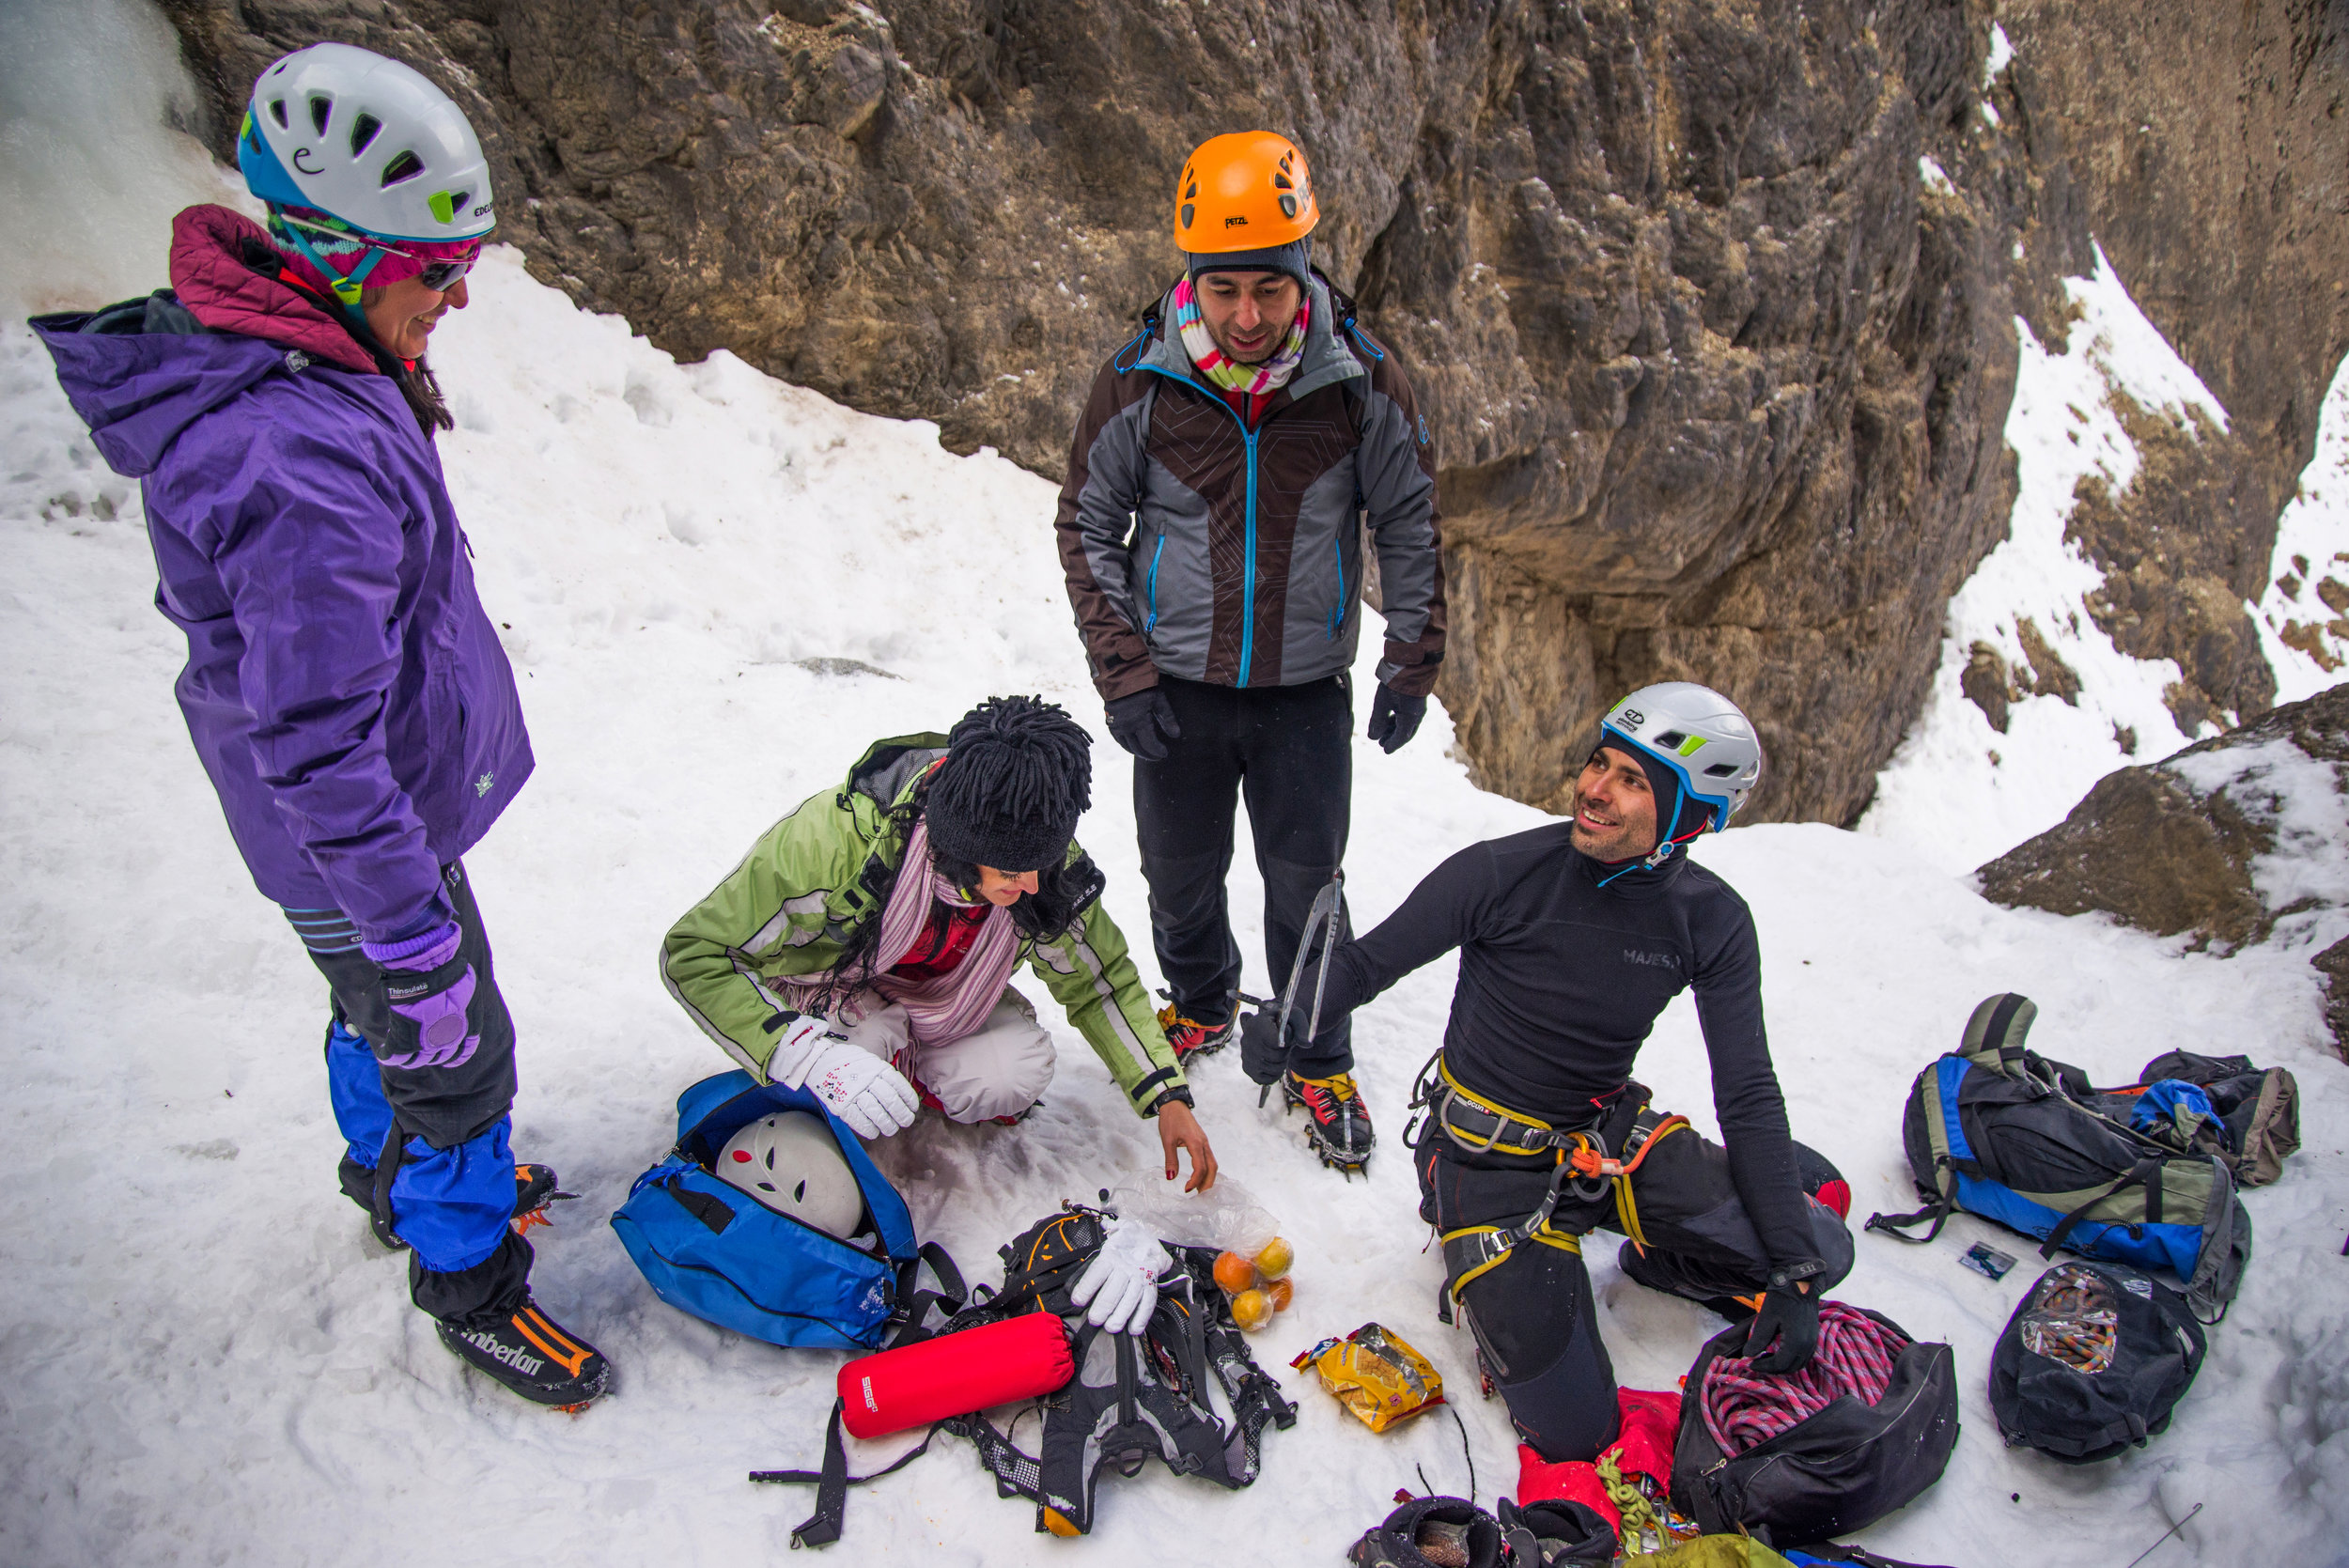 Ice climbing creates a relaxed  atmosphere for socializing among Shiva and her friends after they are done with the activity.